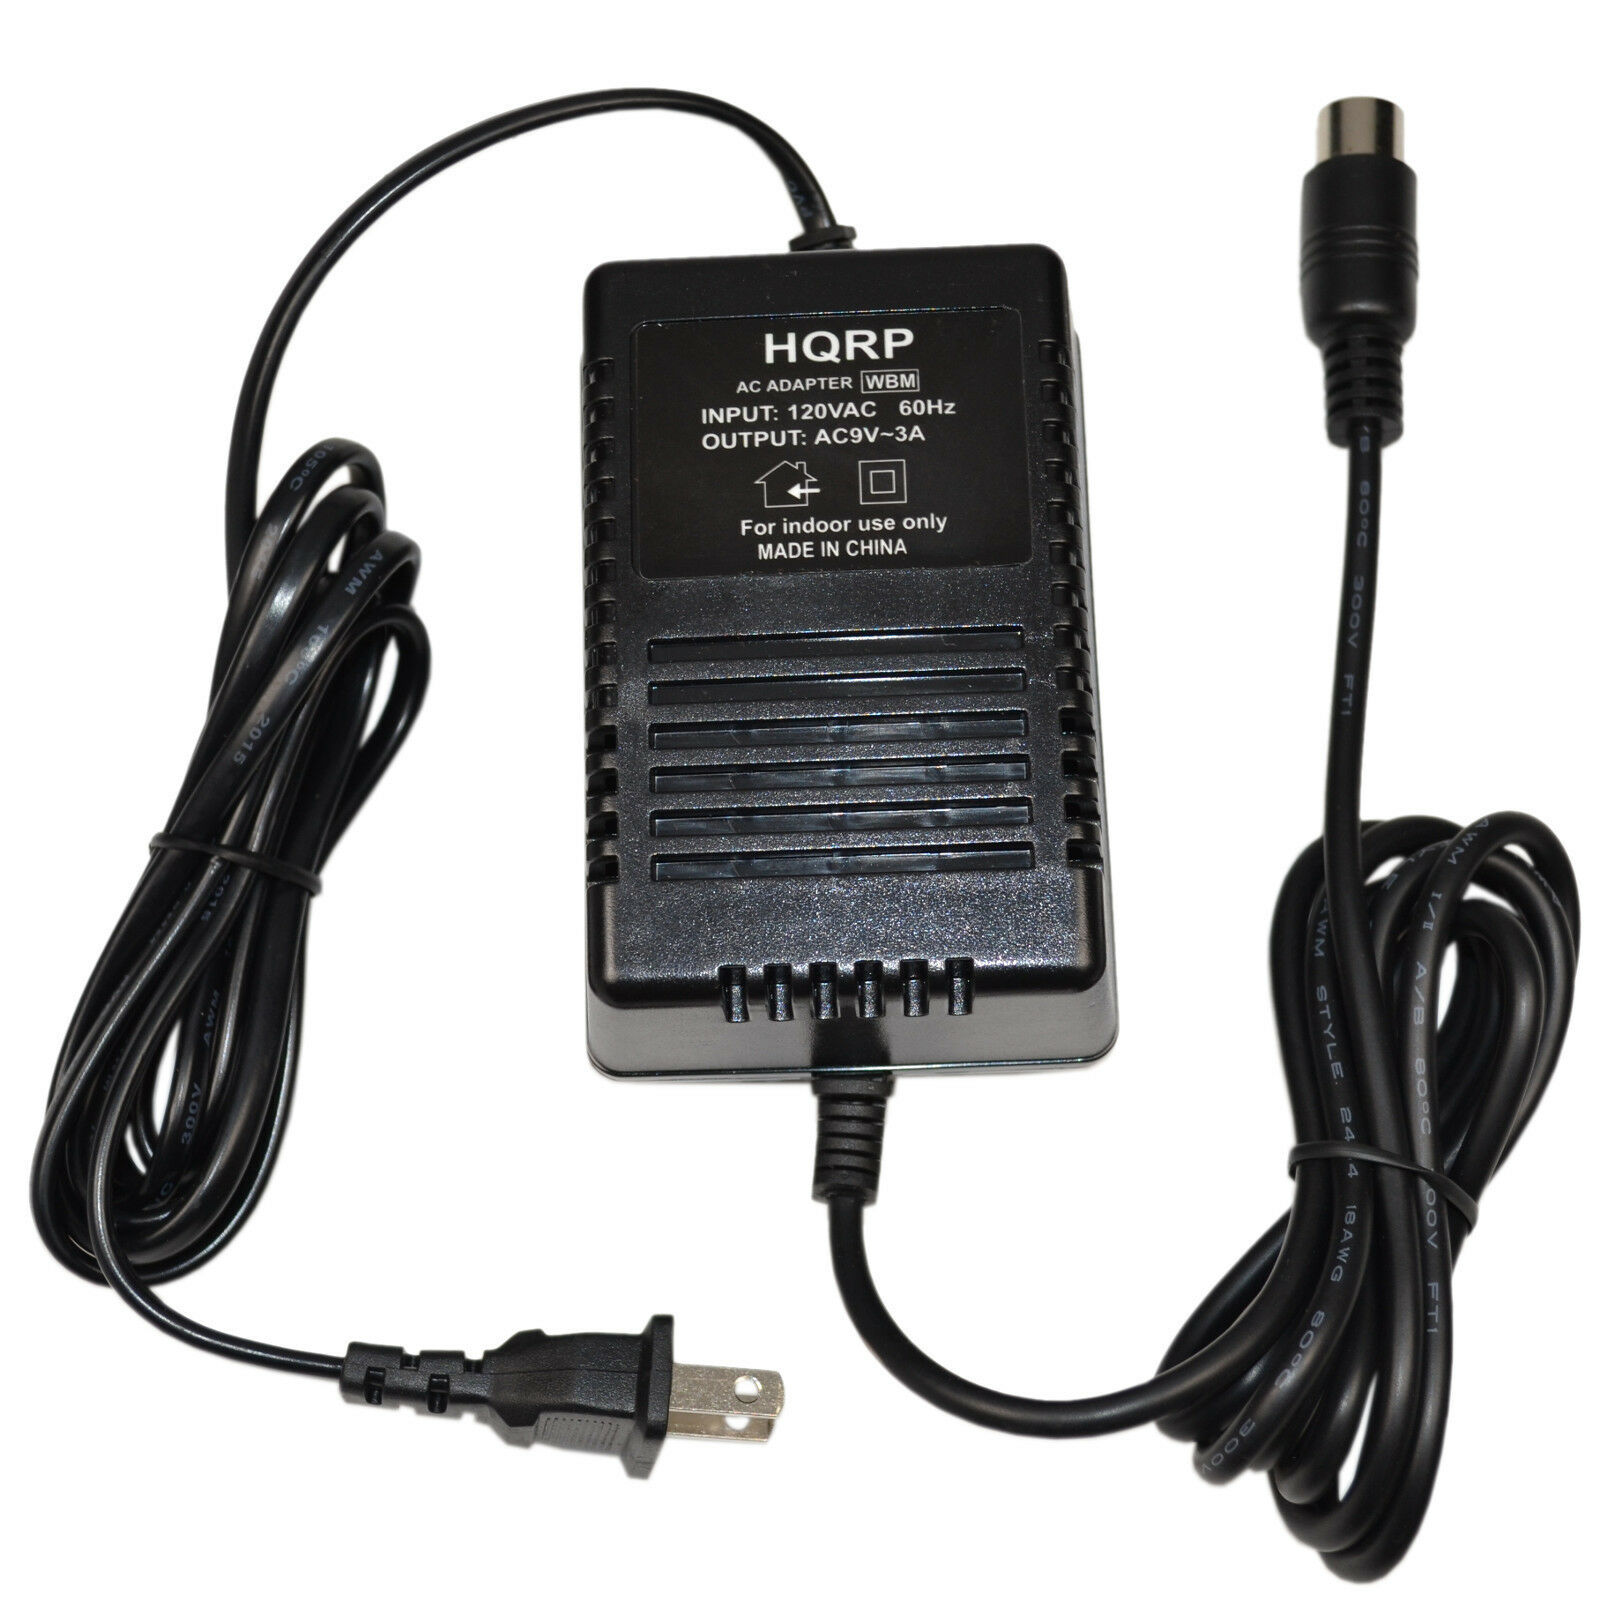 Power Supply AC Adapter for Korg Triton / Tr / Karma / N5EX / N1 KA163E Compatible Brand: For Korg - Click Image to Close